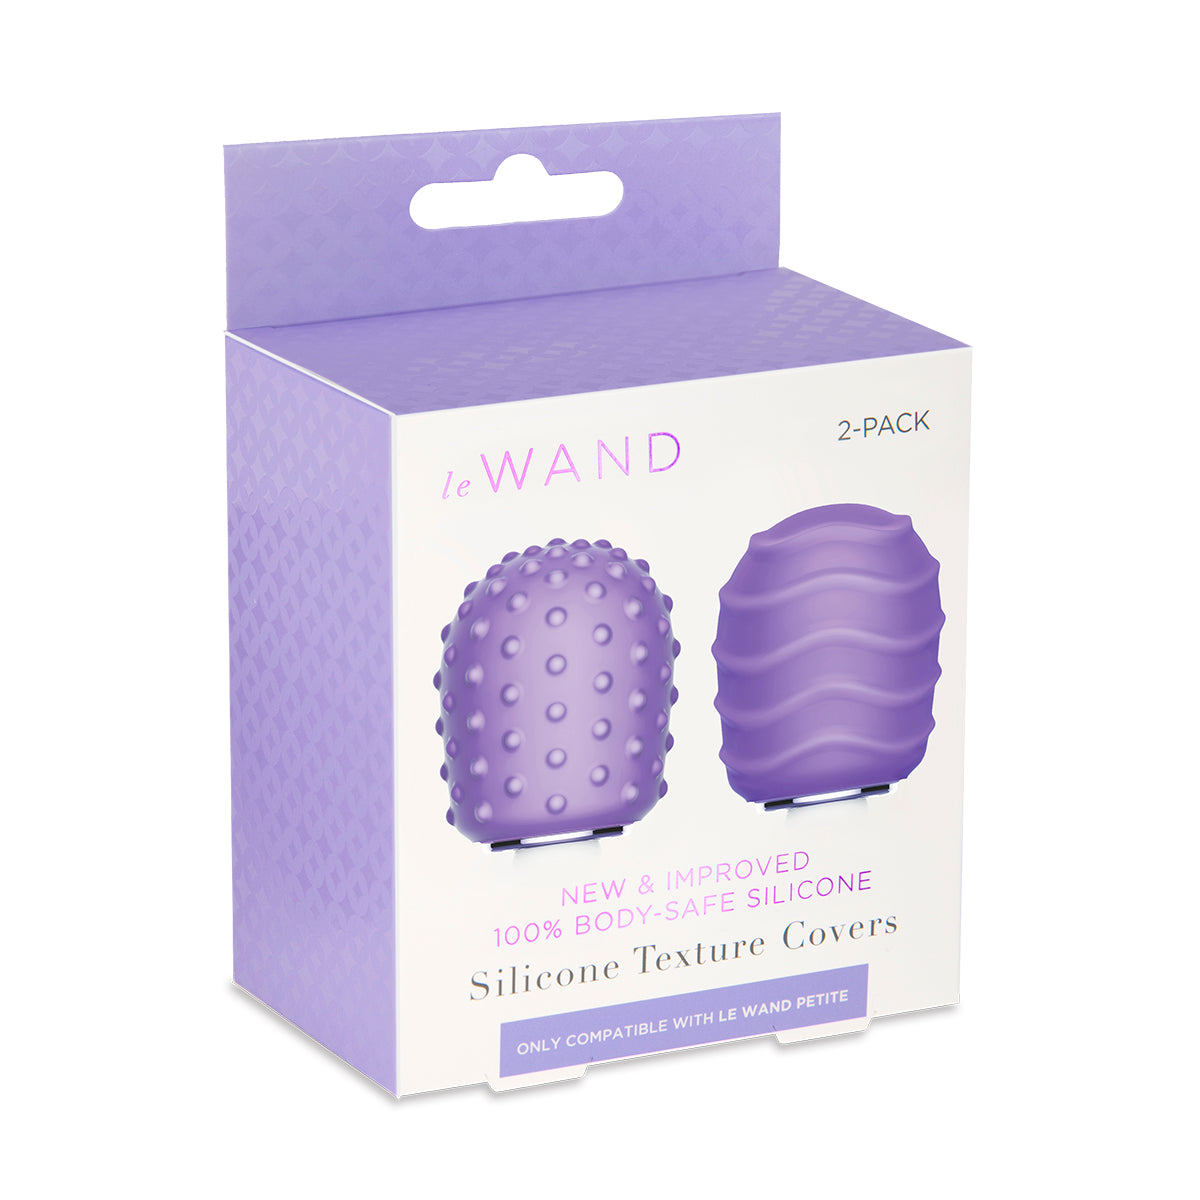 Le Wand Petite Silicone Covers 2-pack